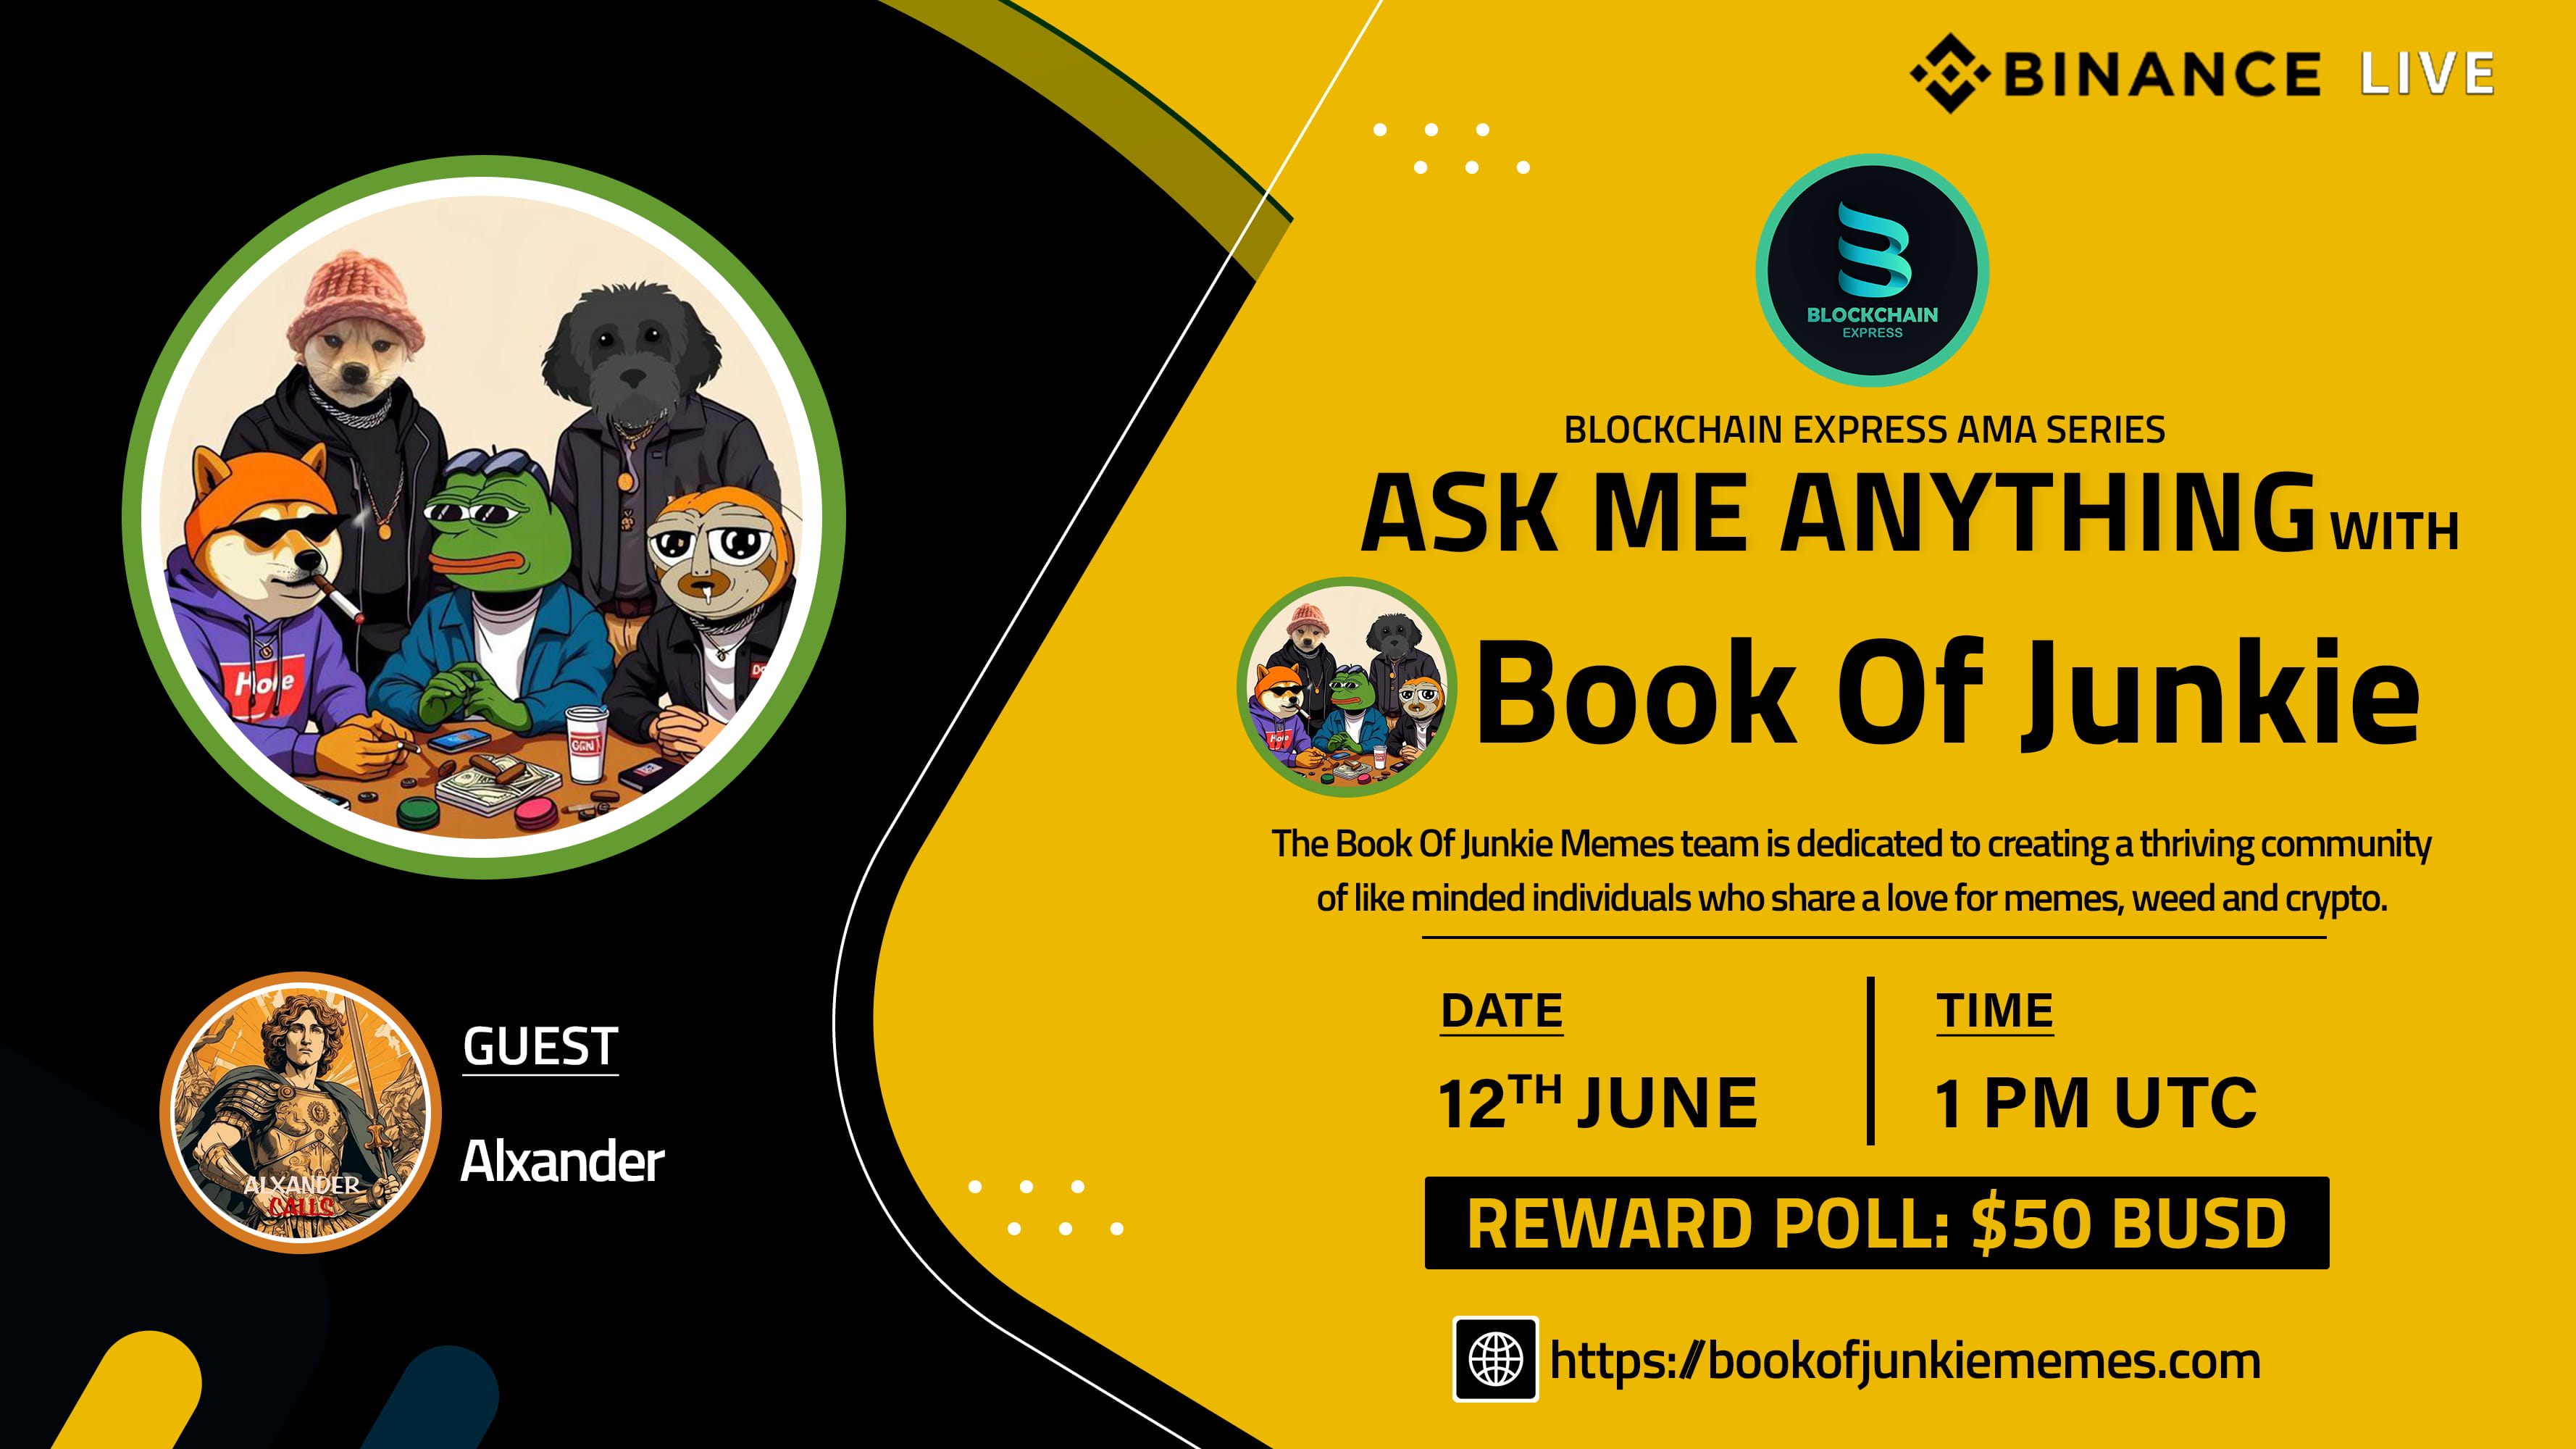 ₿lockchain Express will be hosting an AMA session with" Book Of Junkie "